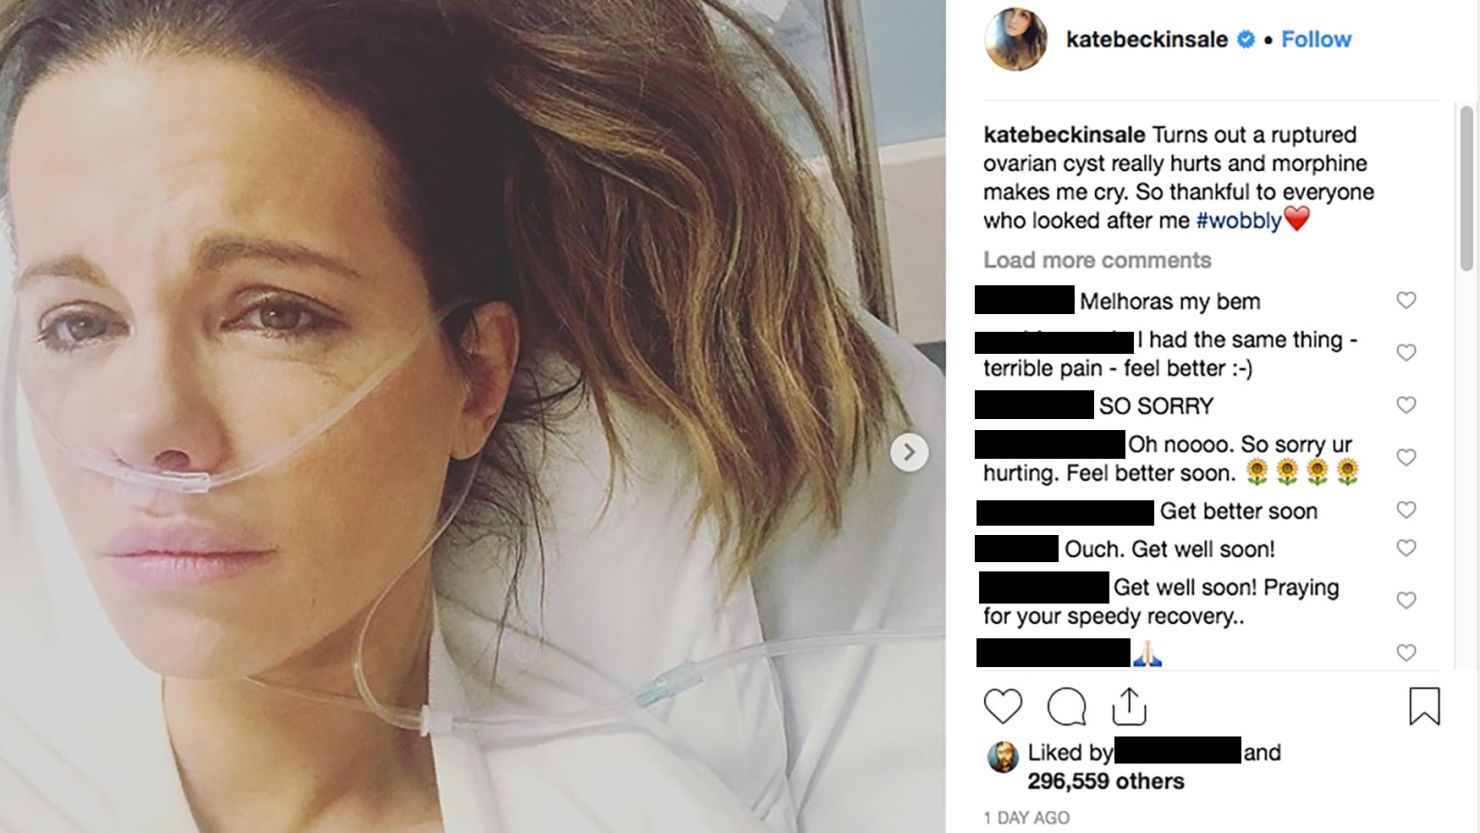 Kate Beckinsale Instagramed about her hospitalization with a ruptured ovarian cyst. "Turns out a ruptured ovarian cyst really hurts and morphine makes me cry. 